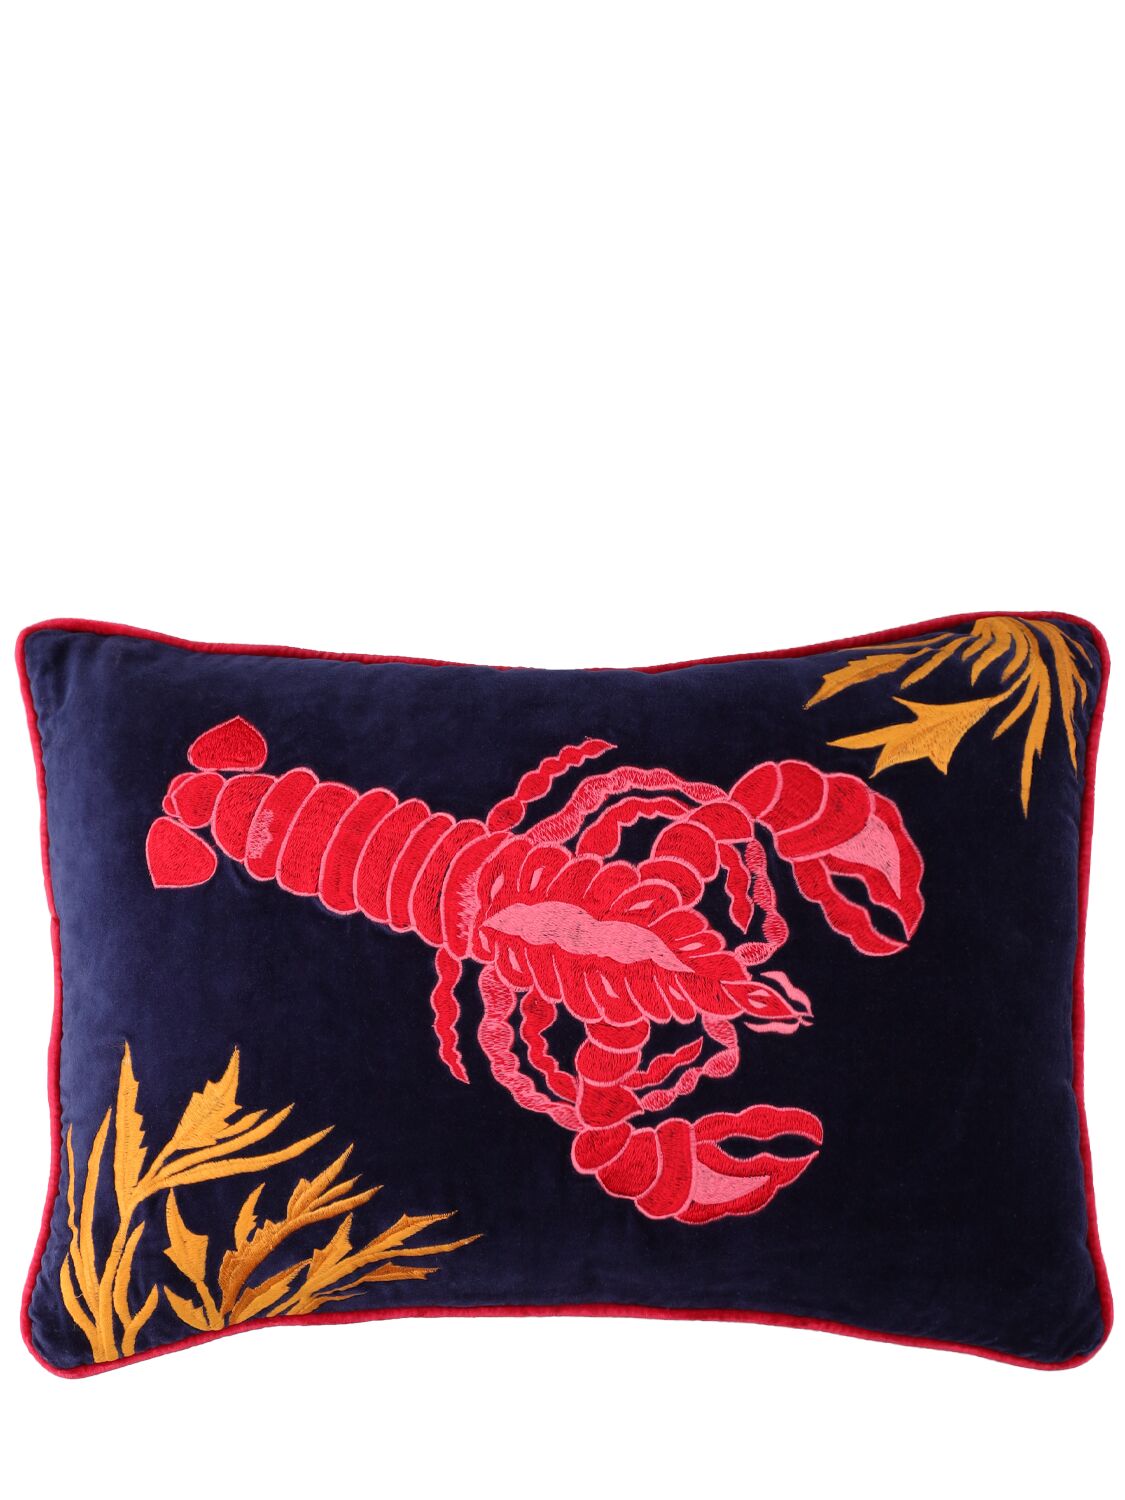 Les Ottomans Hand-embroidered Cotton Velvet Cushion In Blue